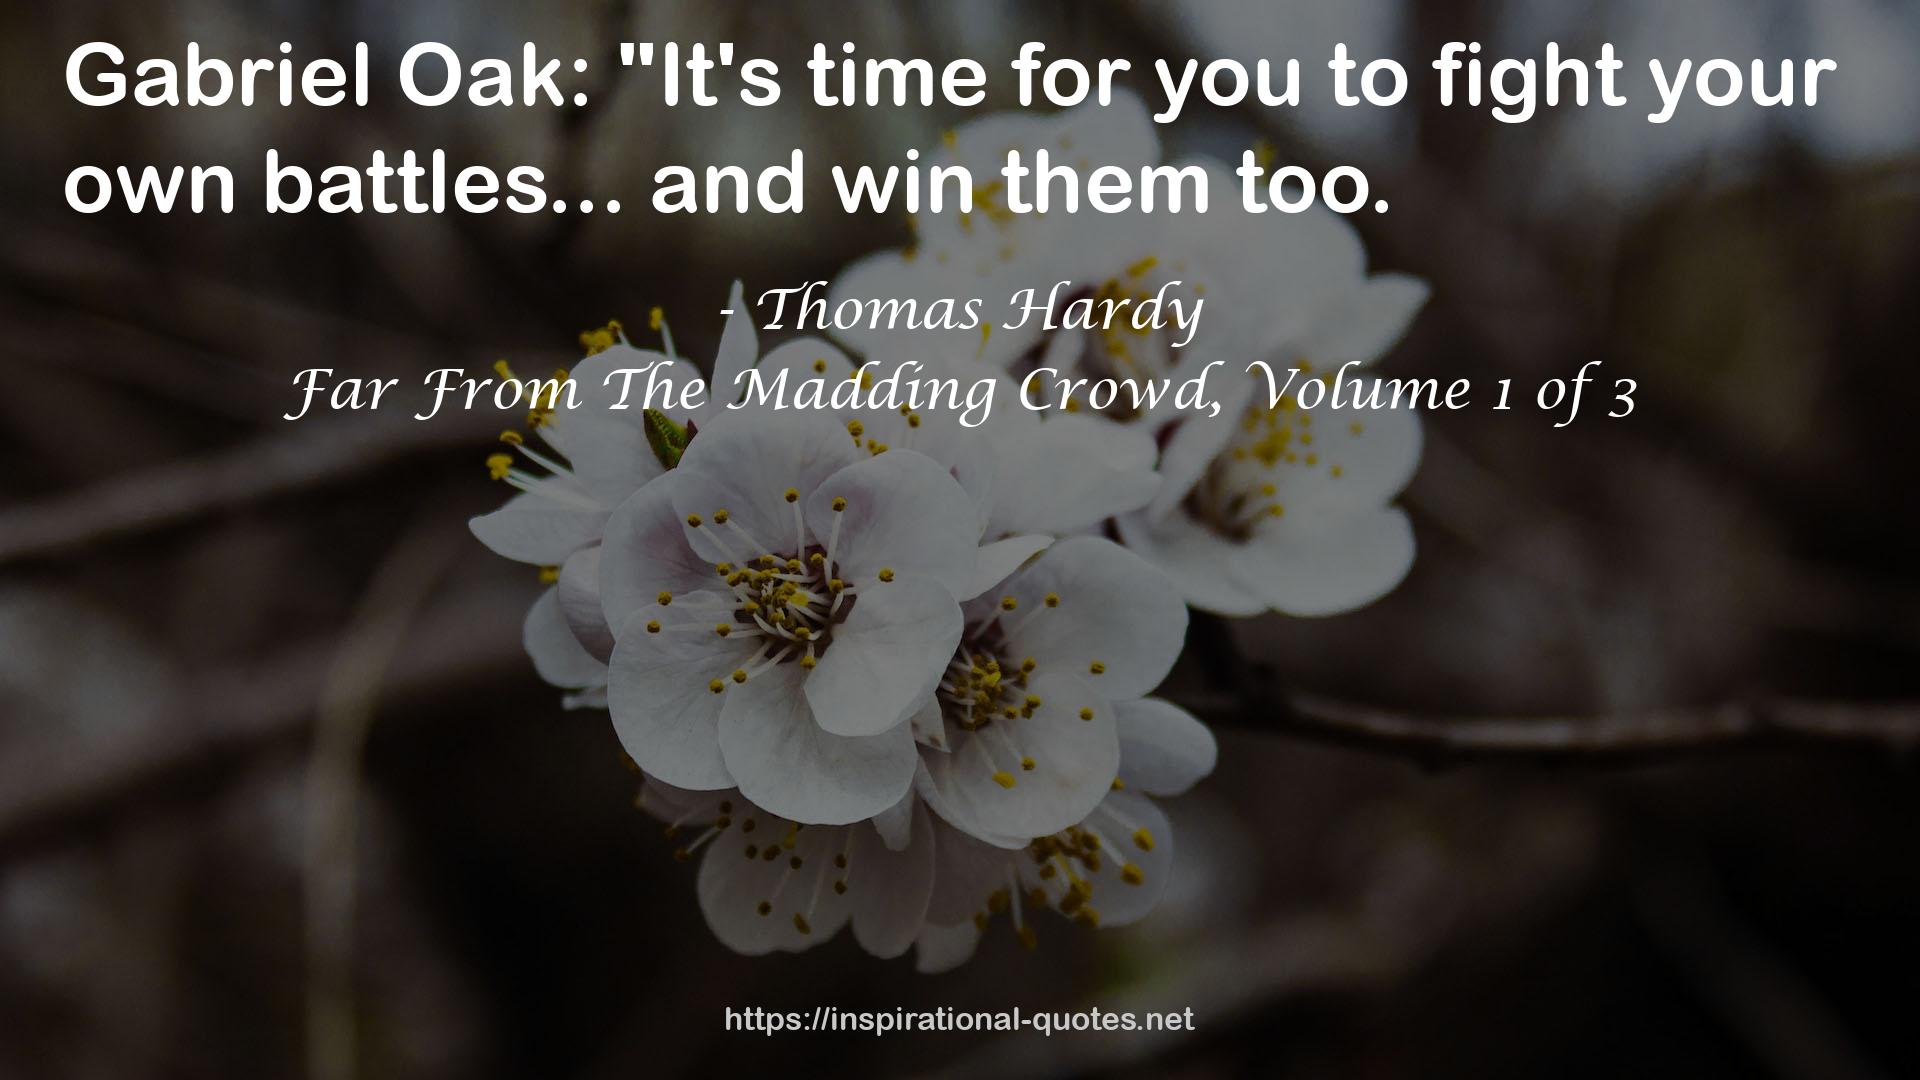 Far From The Madding Crowd, Volume 1 of 3 QUOTES